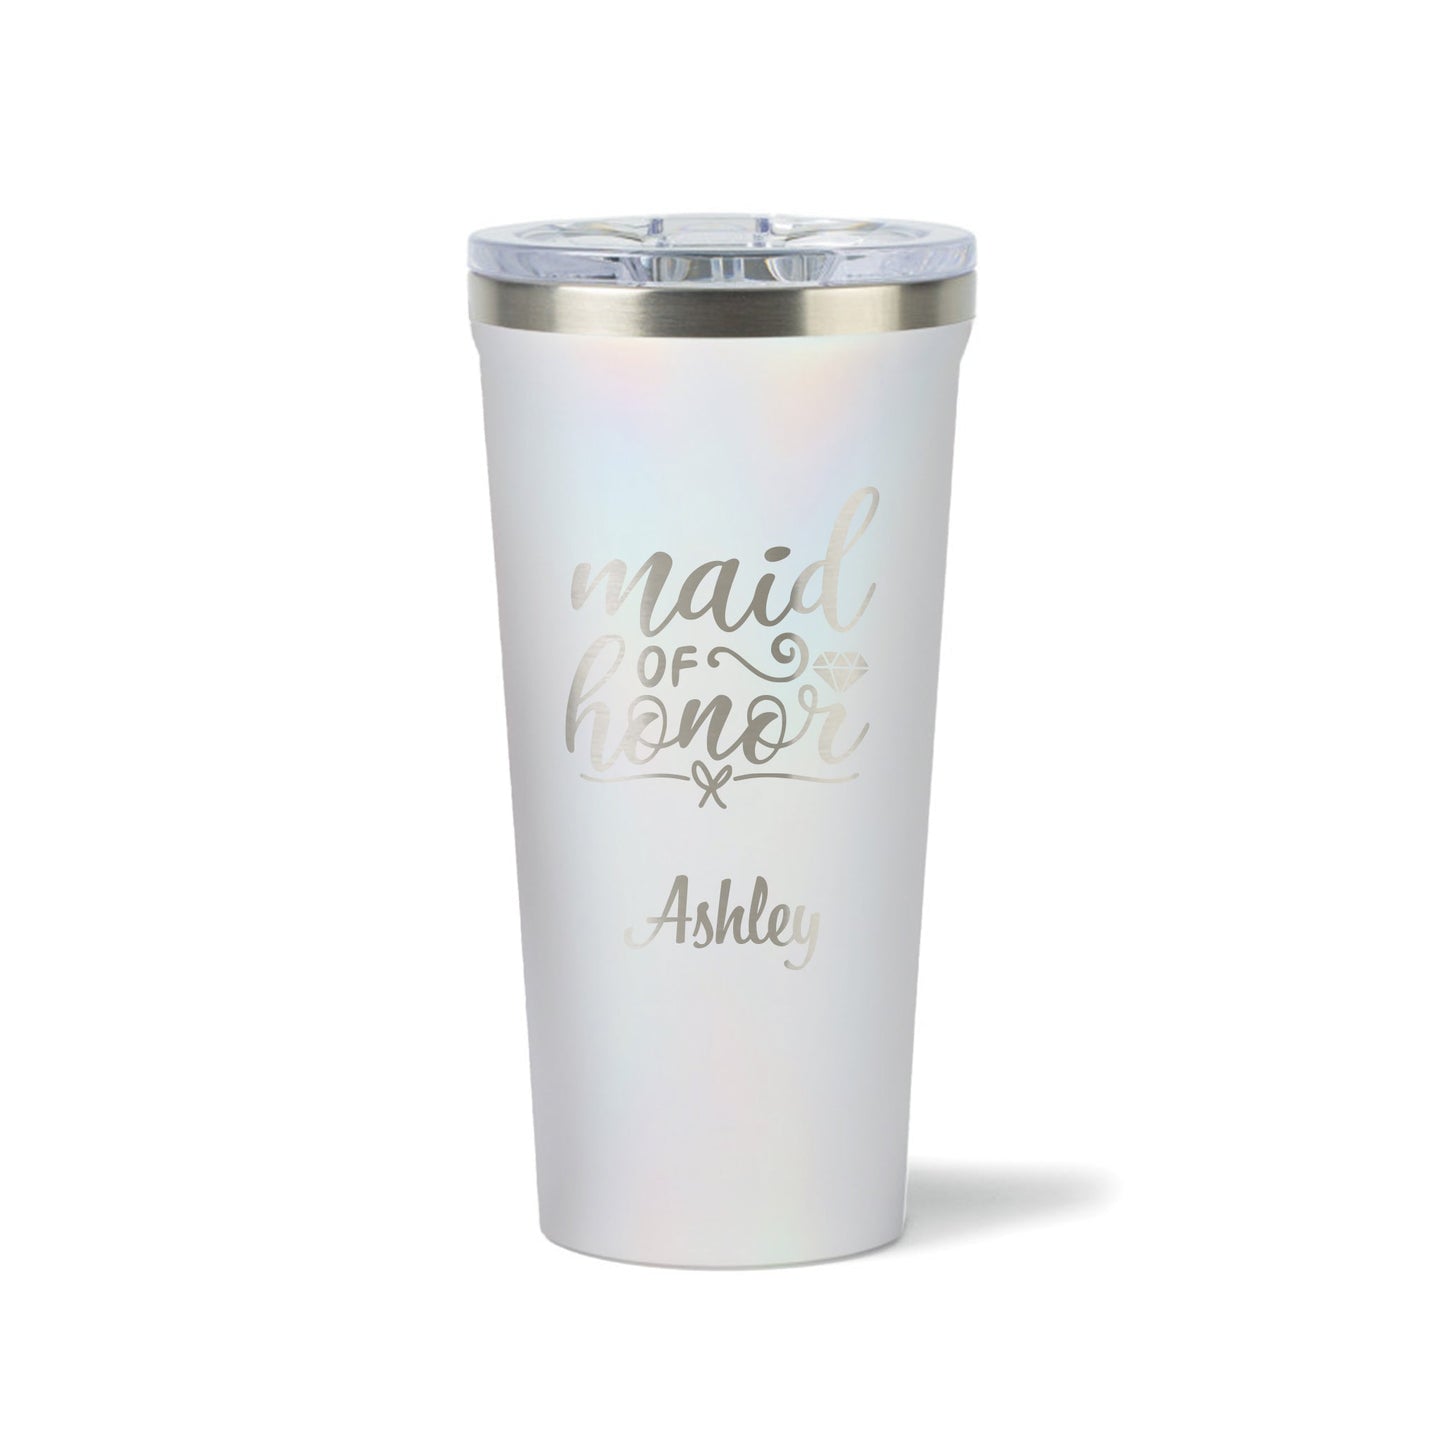 Personalized CORKCICLE® Tumbler 16 oz - Etchified-CORKCICLE®-ETC-GMLN-100481-100481-118